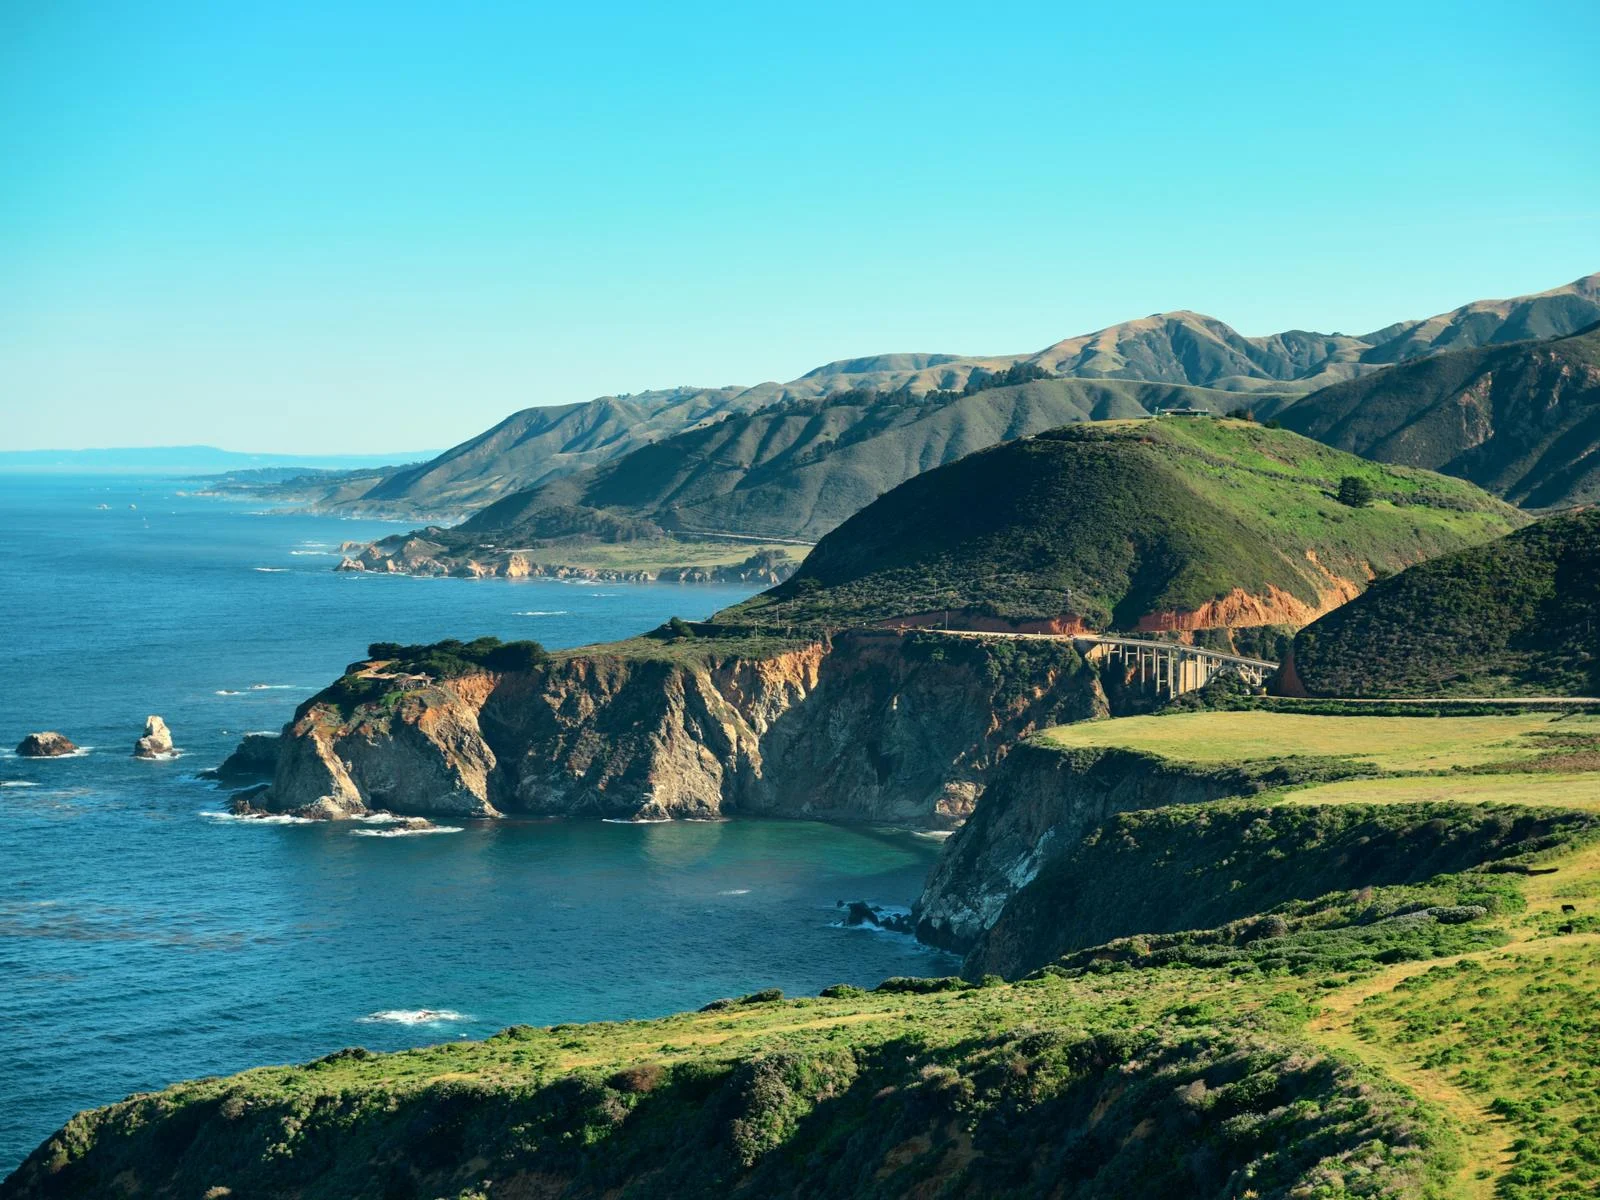 Astonishing coastal seascape and distinct green land formation in Big Sur, California is one of the most beautiful places in the US